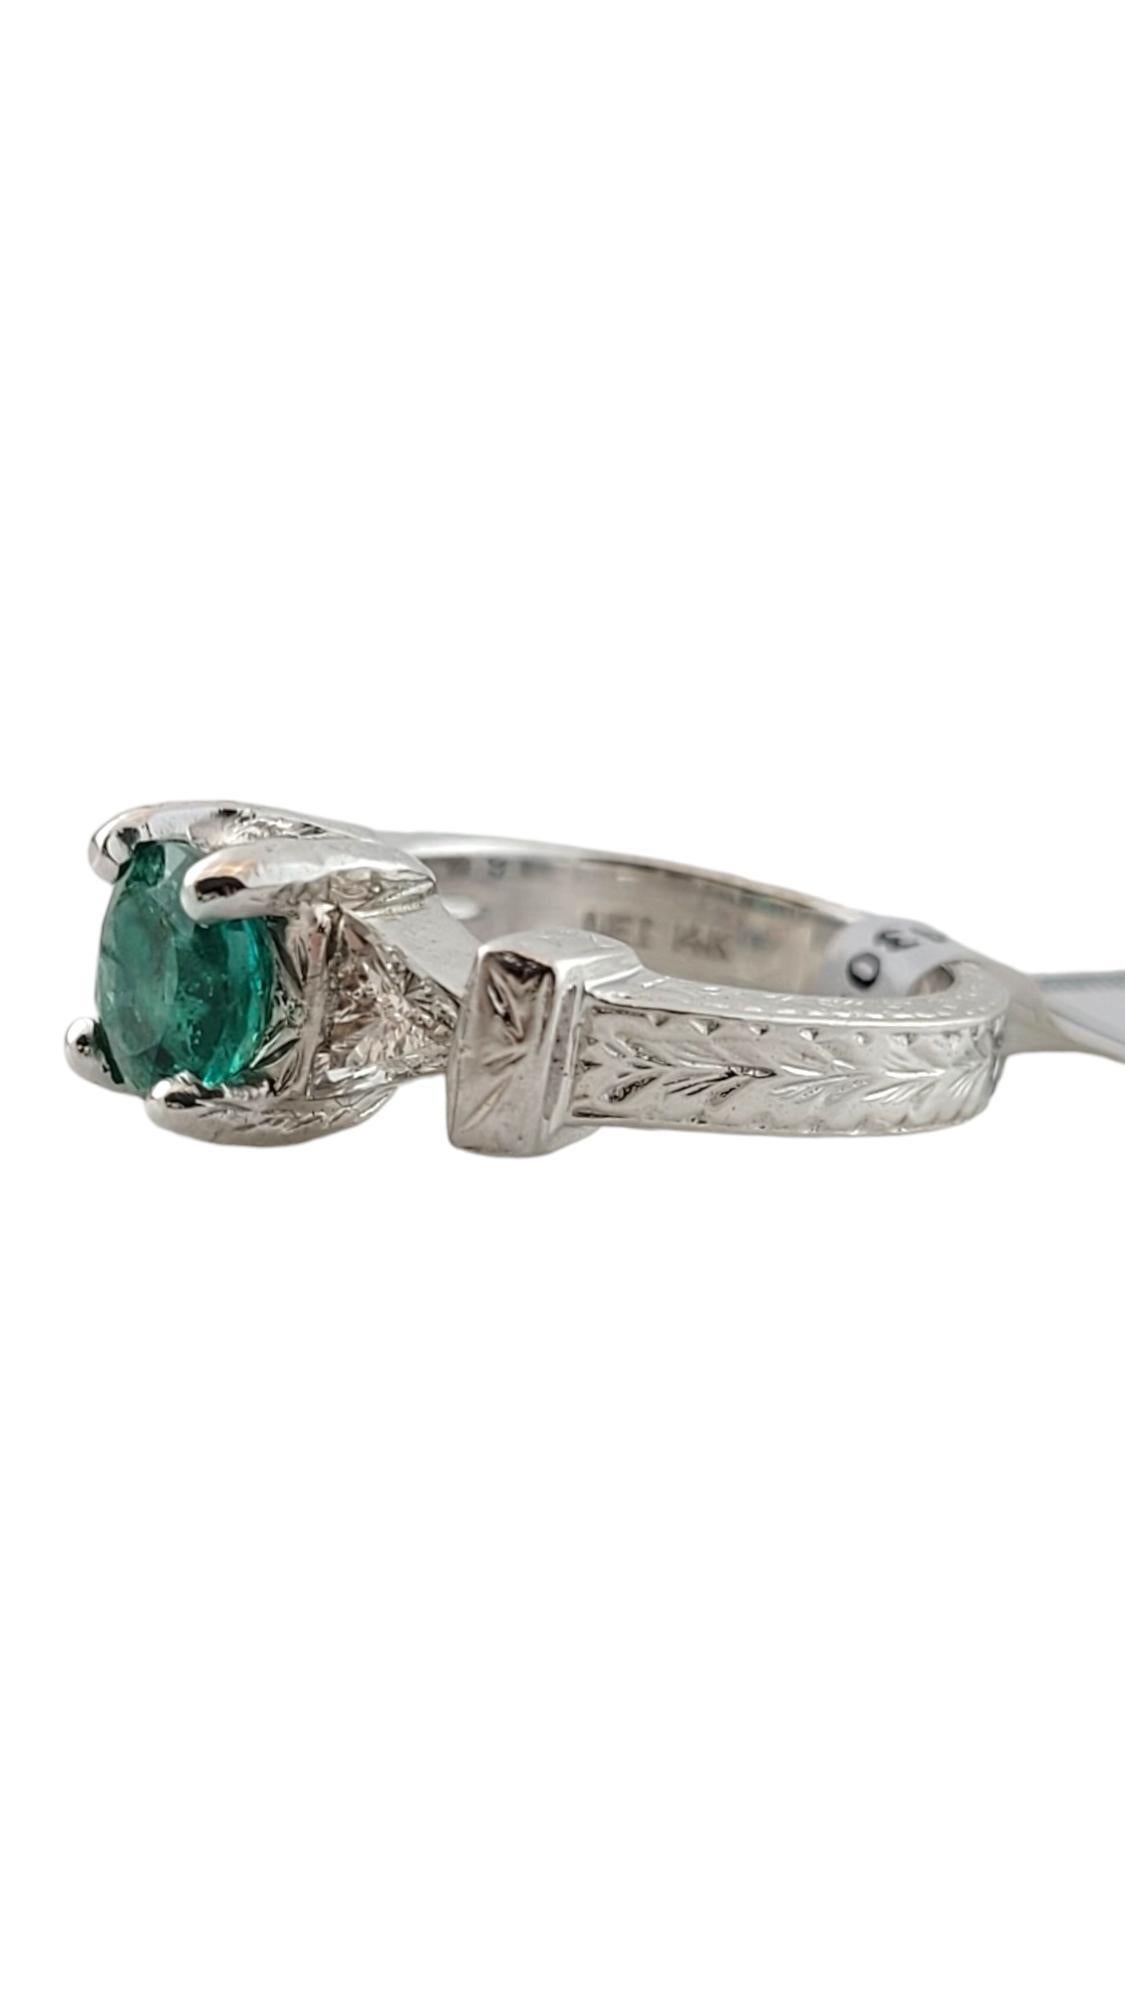 IGI Certified 14K White Gold Natural Emerald and Diamond Ring Size 5.5

This beautiful natural emerald and diamond ring is set in a 14K white gold mounting

The center round mixed cut emerald is 1.21 cts.

Two triangular modified brilliant diamonds